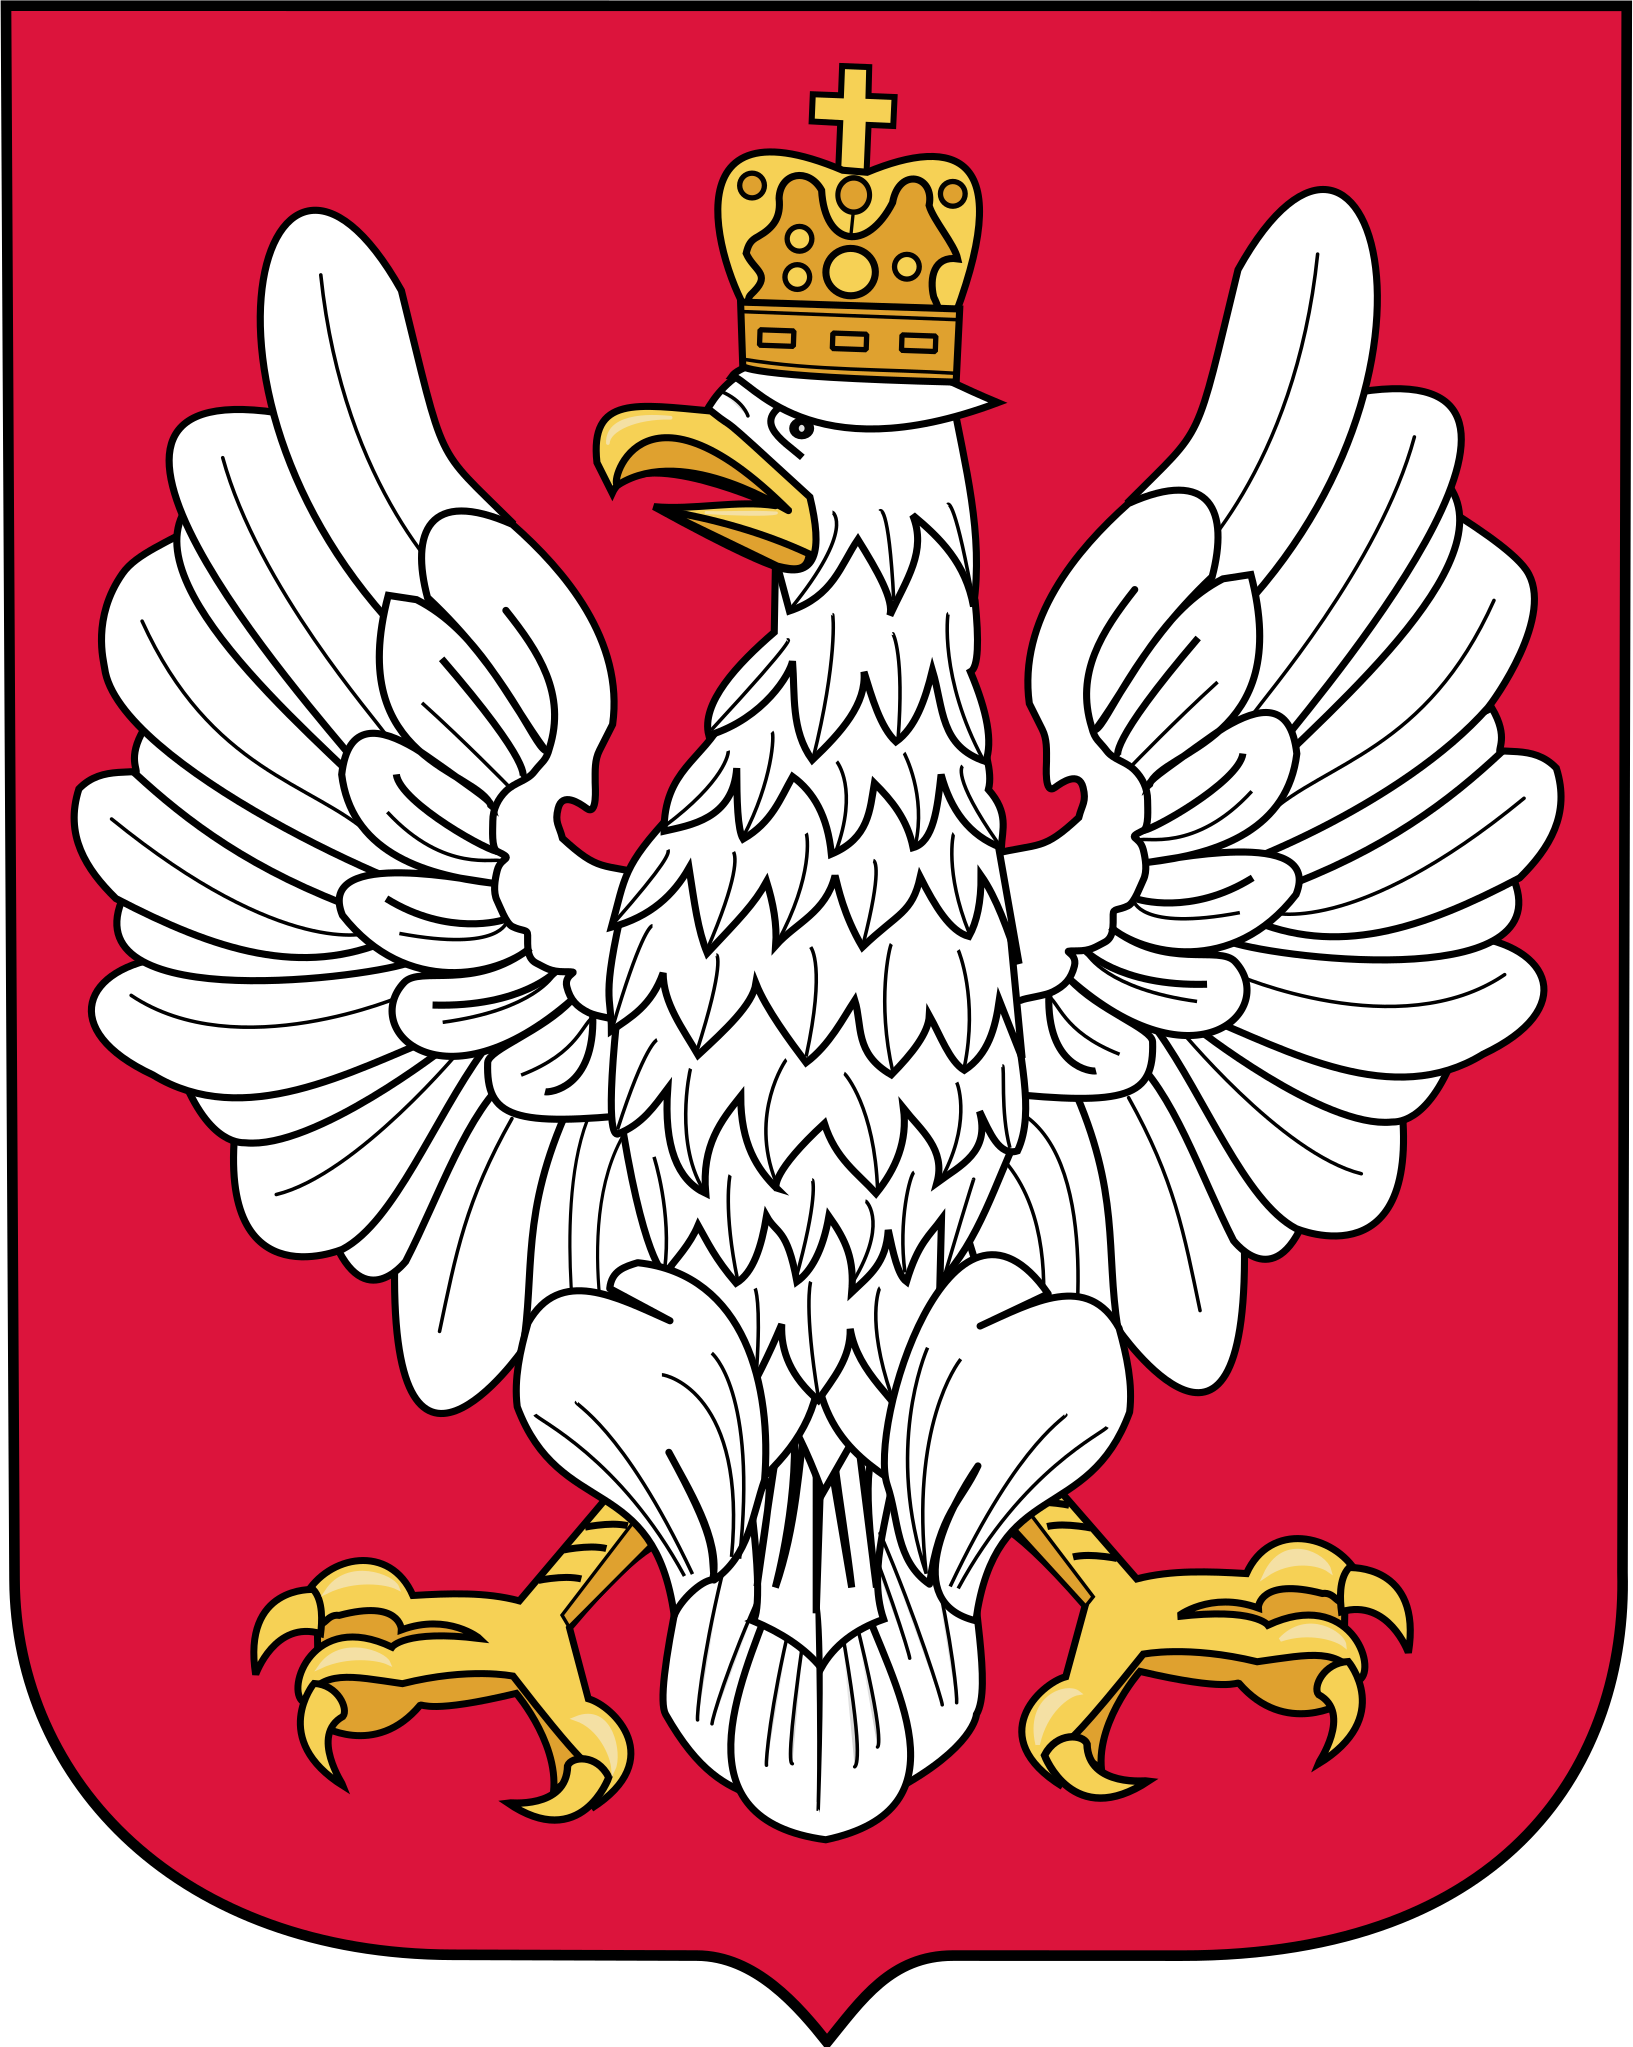 File:Coat Of Arms Of Poland2 1919-1927.Svg - Wikipedia